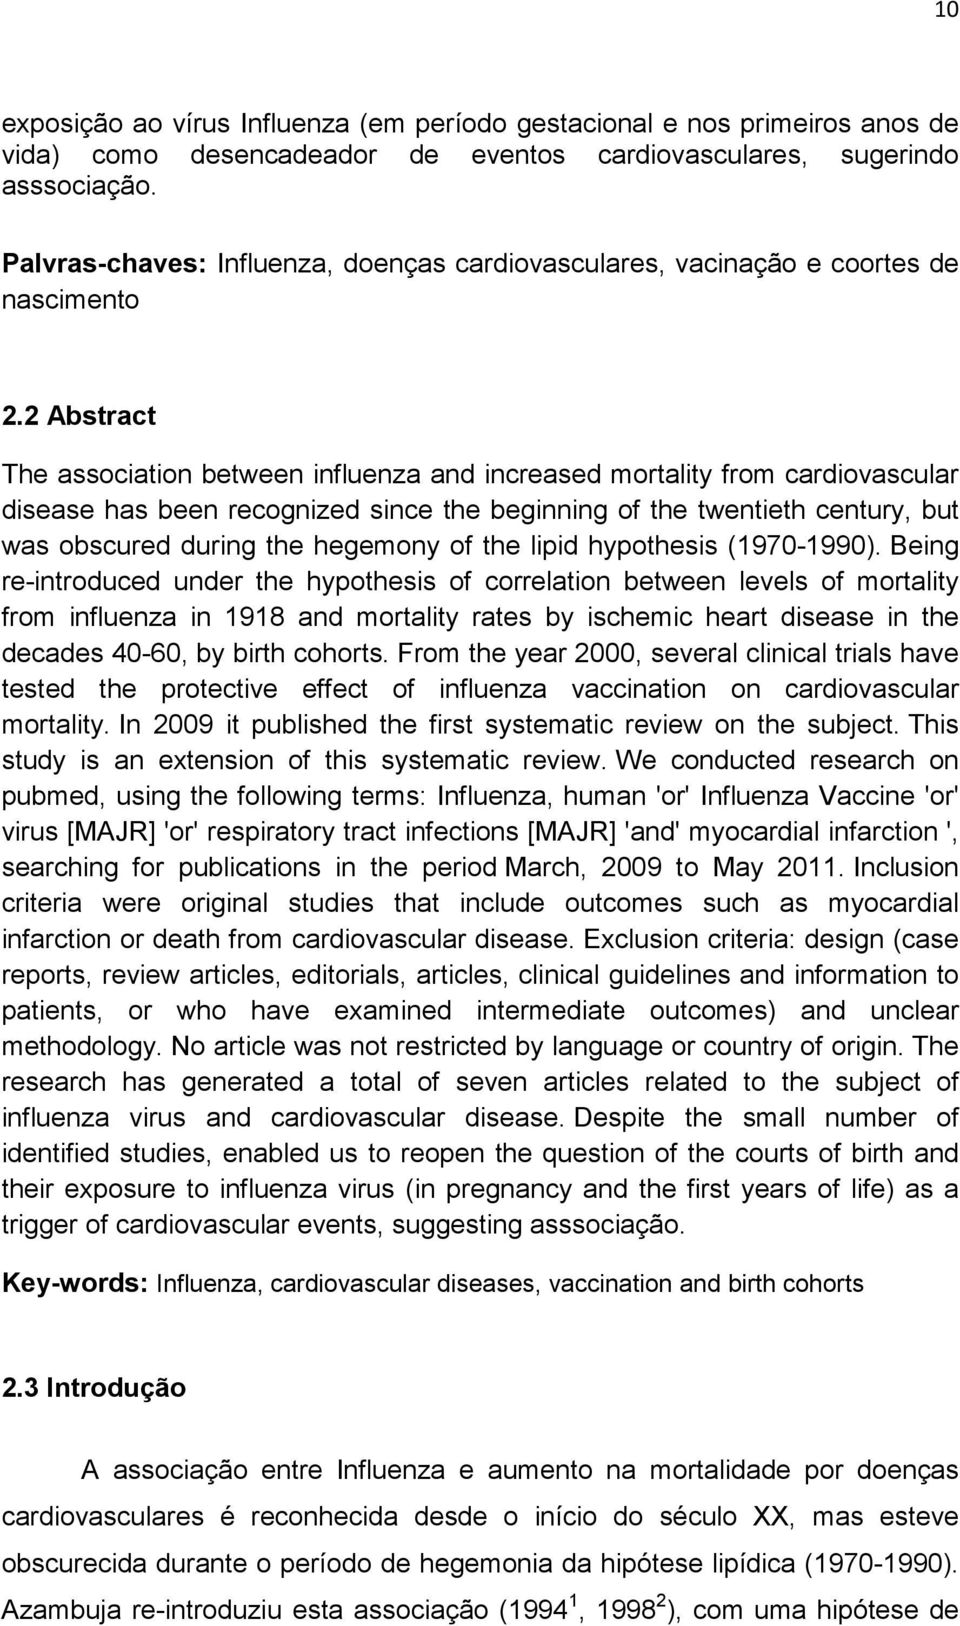 2 Abstract The association between influenza and increased mortality from cardiovascular disease has been recognized since the beginning of the twentieth century, but was obscured during the hegemony